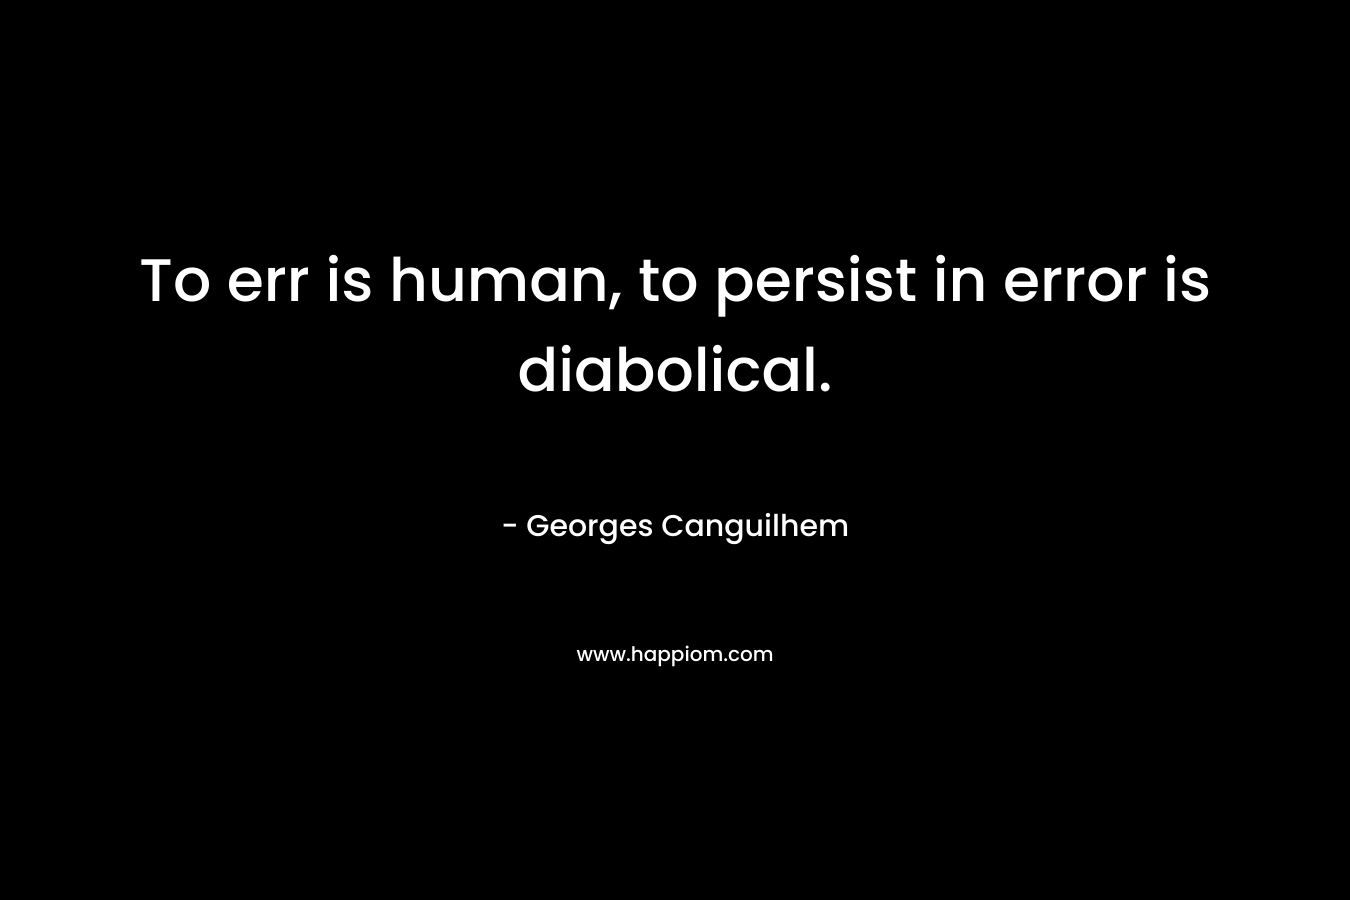 To err is human, to persist in error is diabolical.